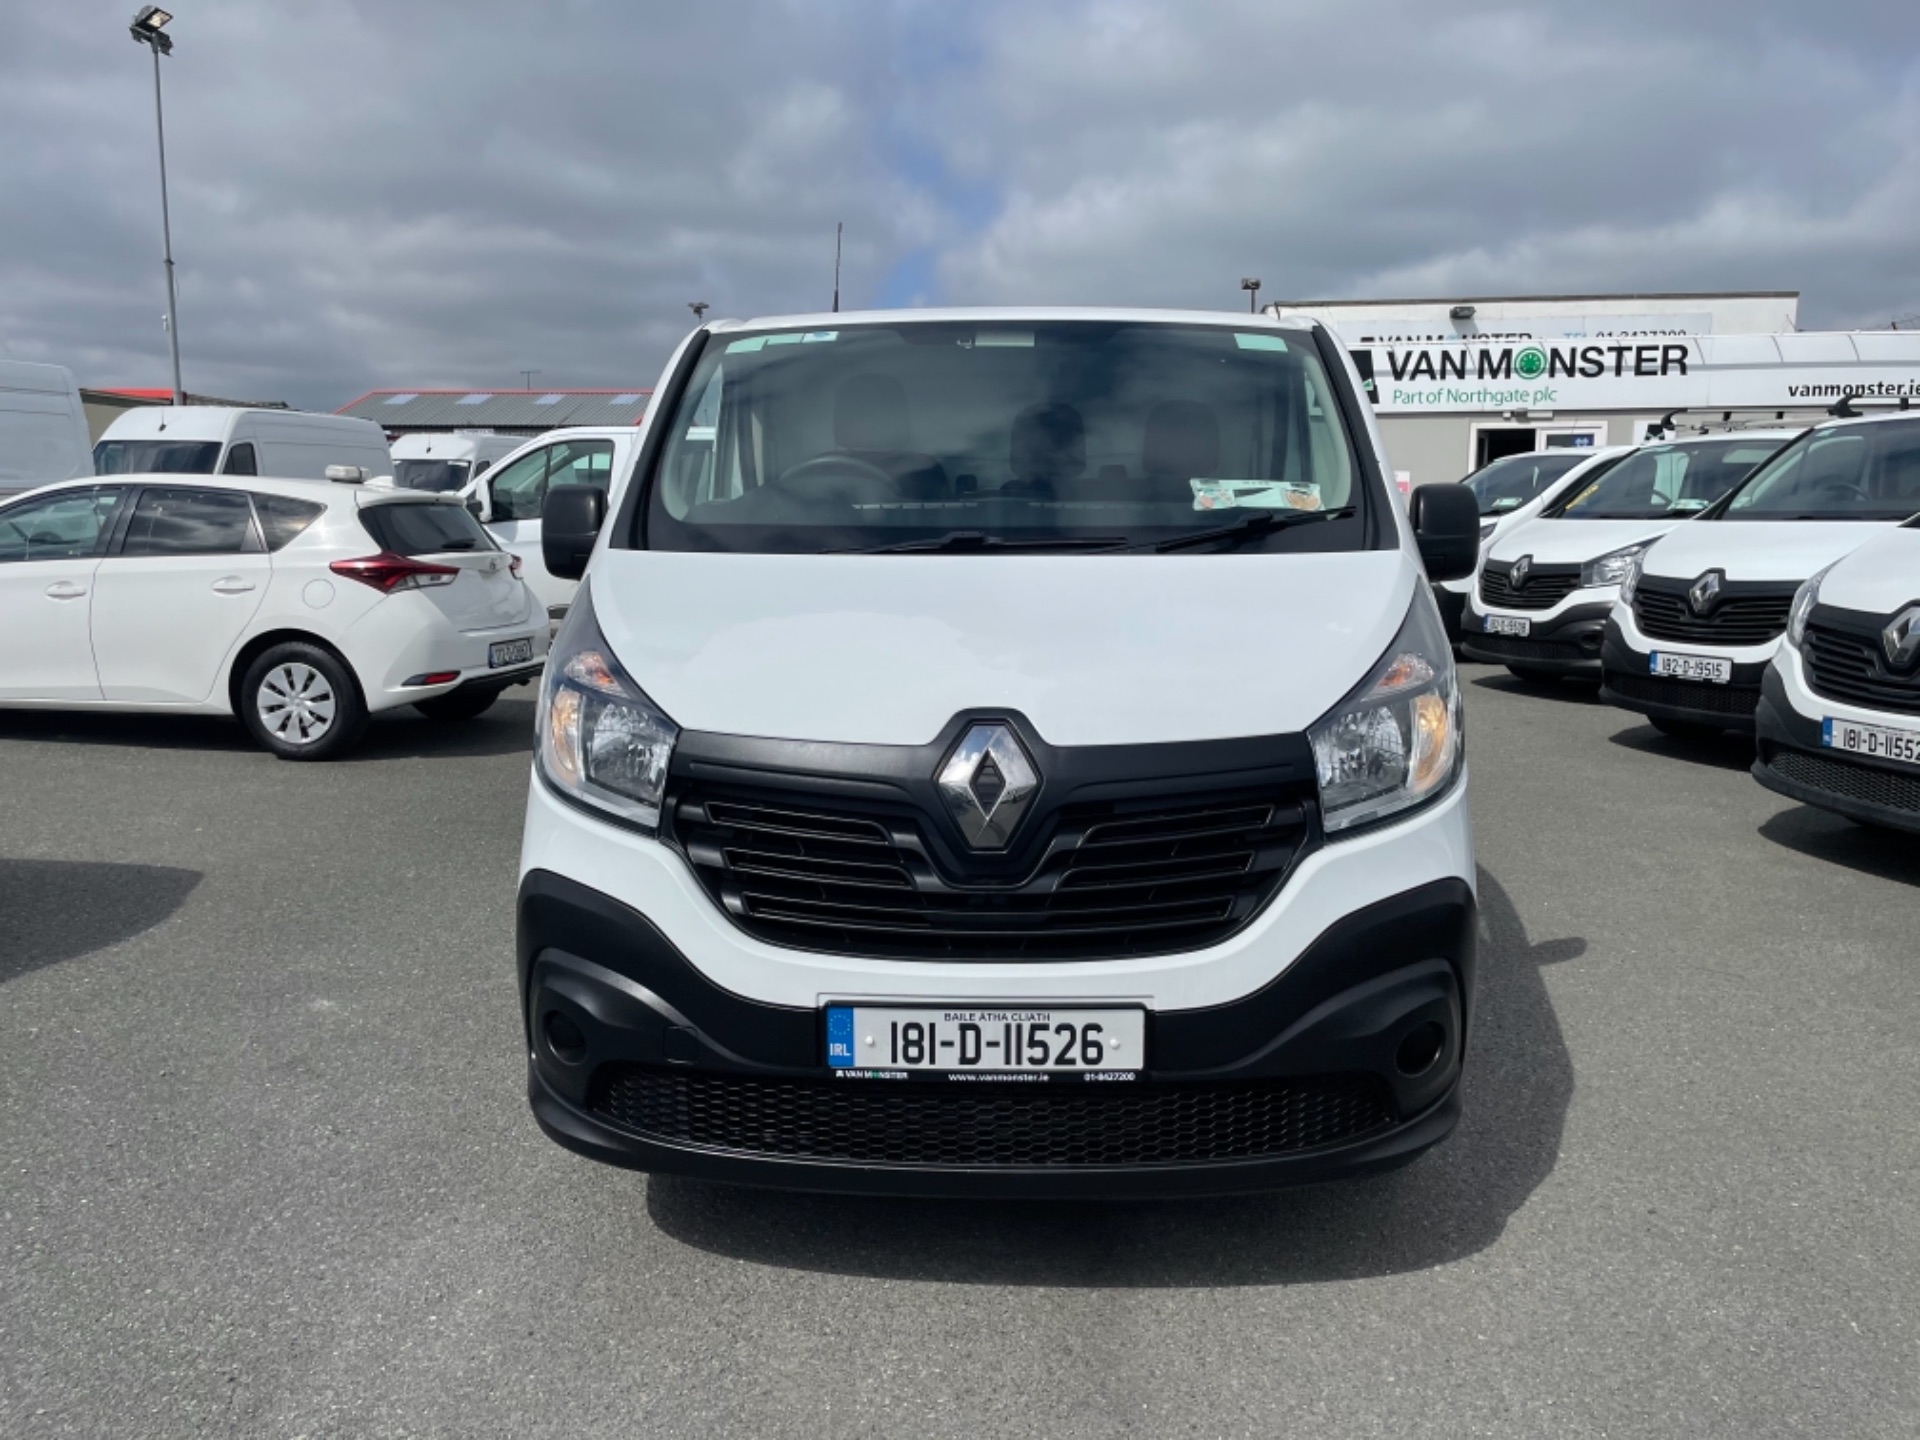 2018 Renault Trafic LL29 DCI 120 Business 3DR (181D11526) Thumbnail 2